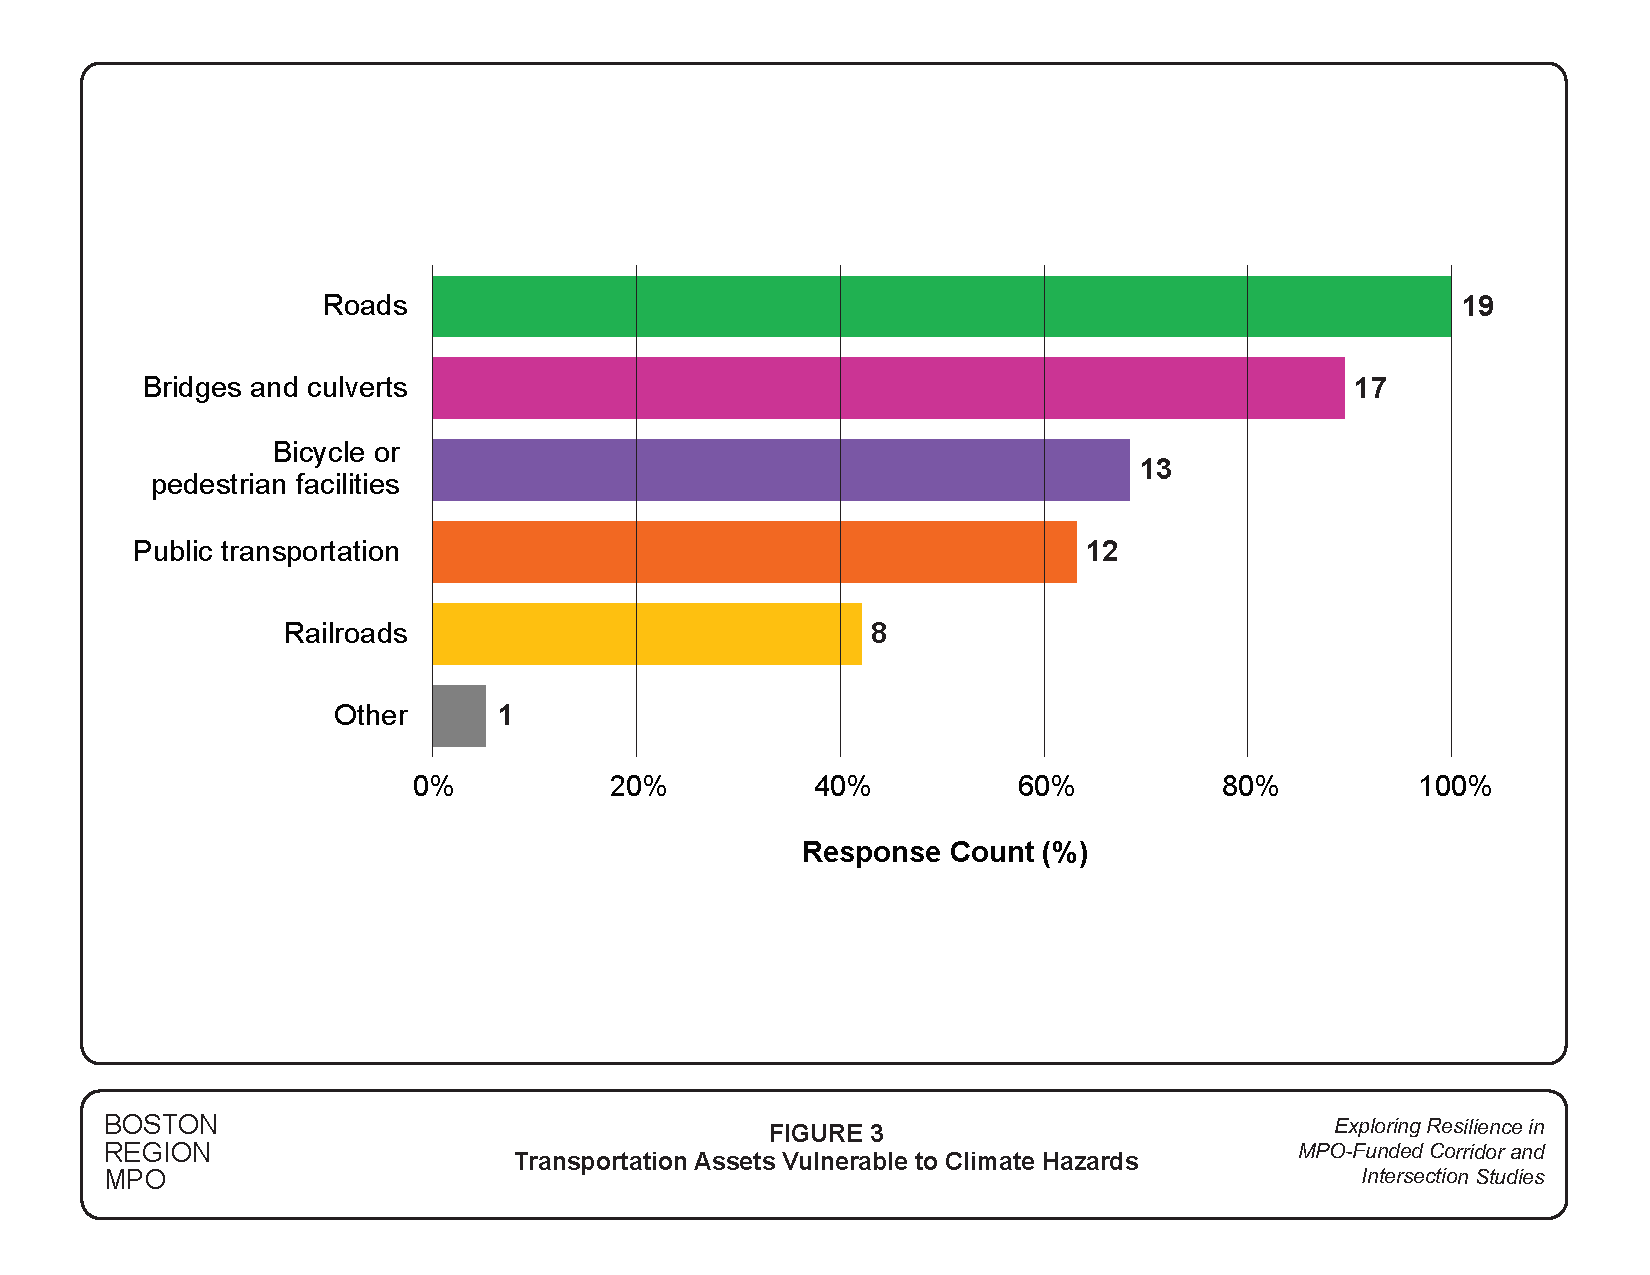 Figure 3 is a graph showing the survey results about critical transportation assets vulnerable to climate hazards.